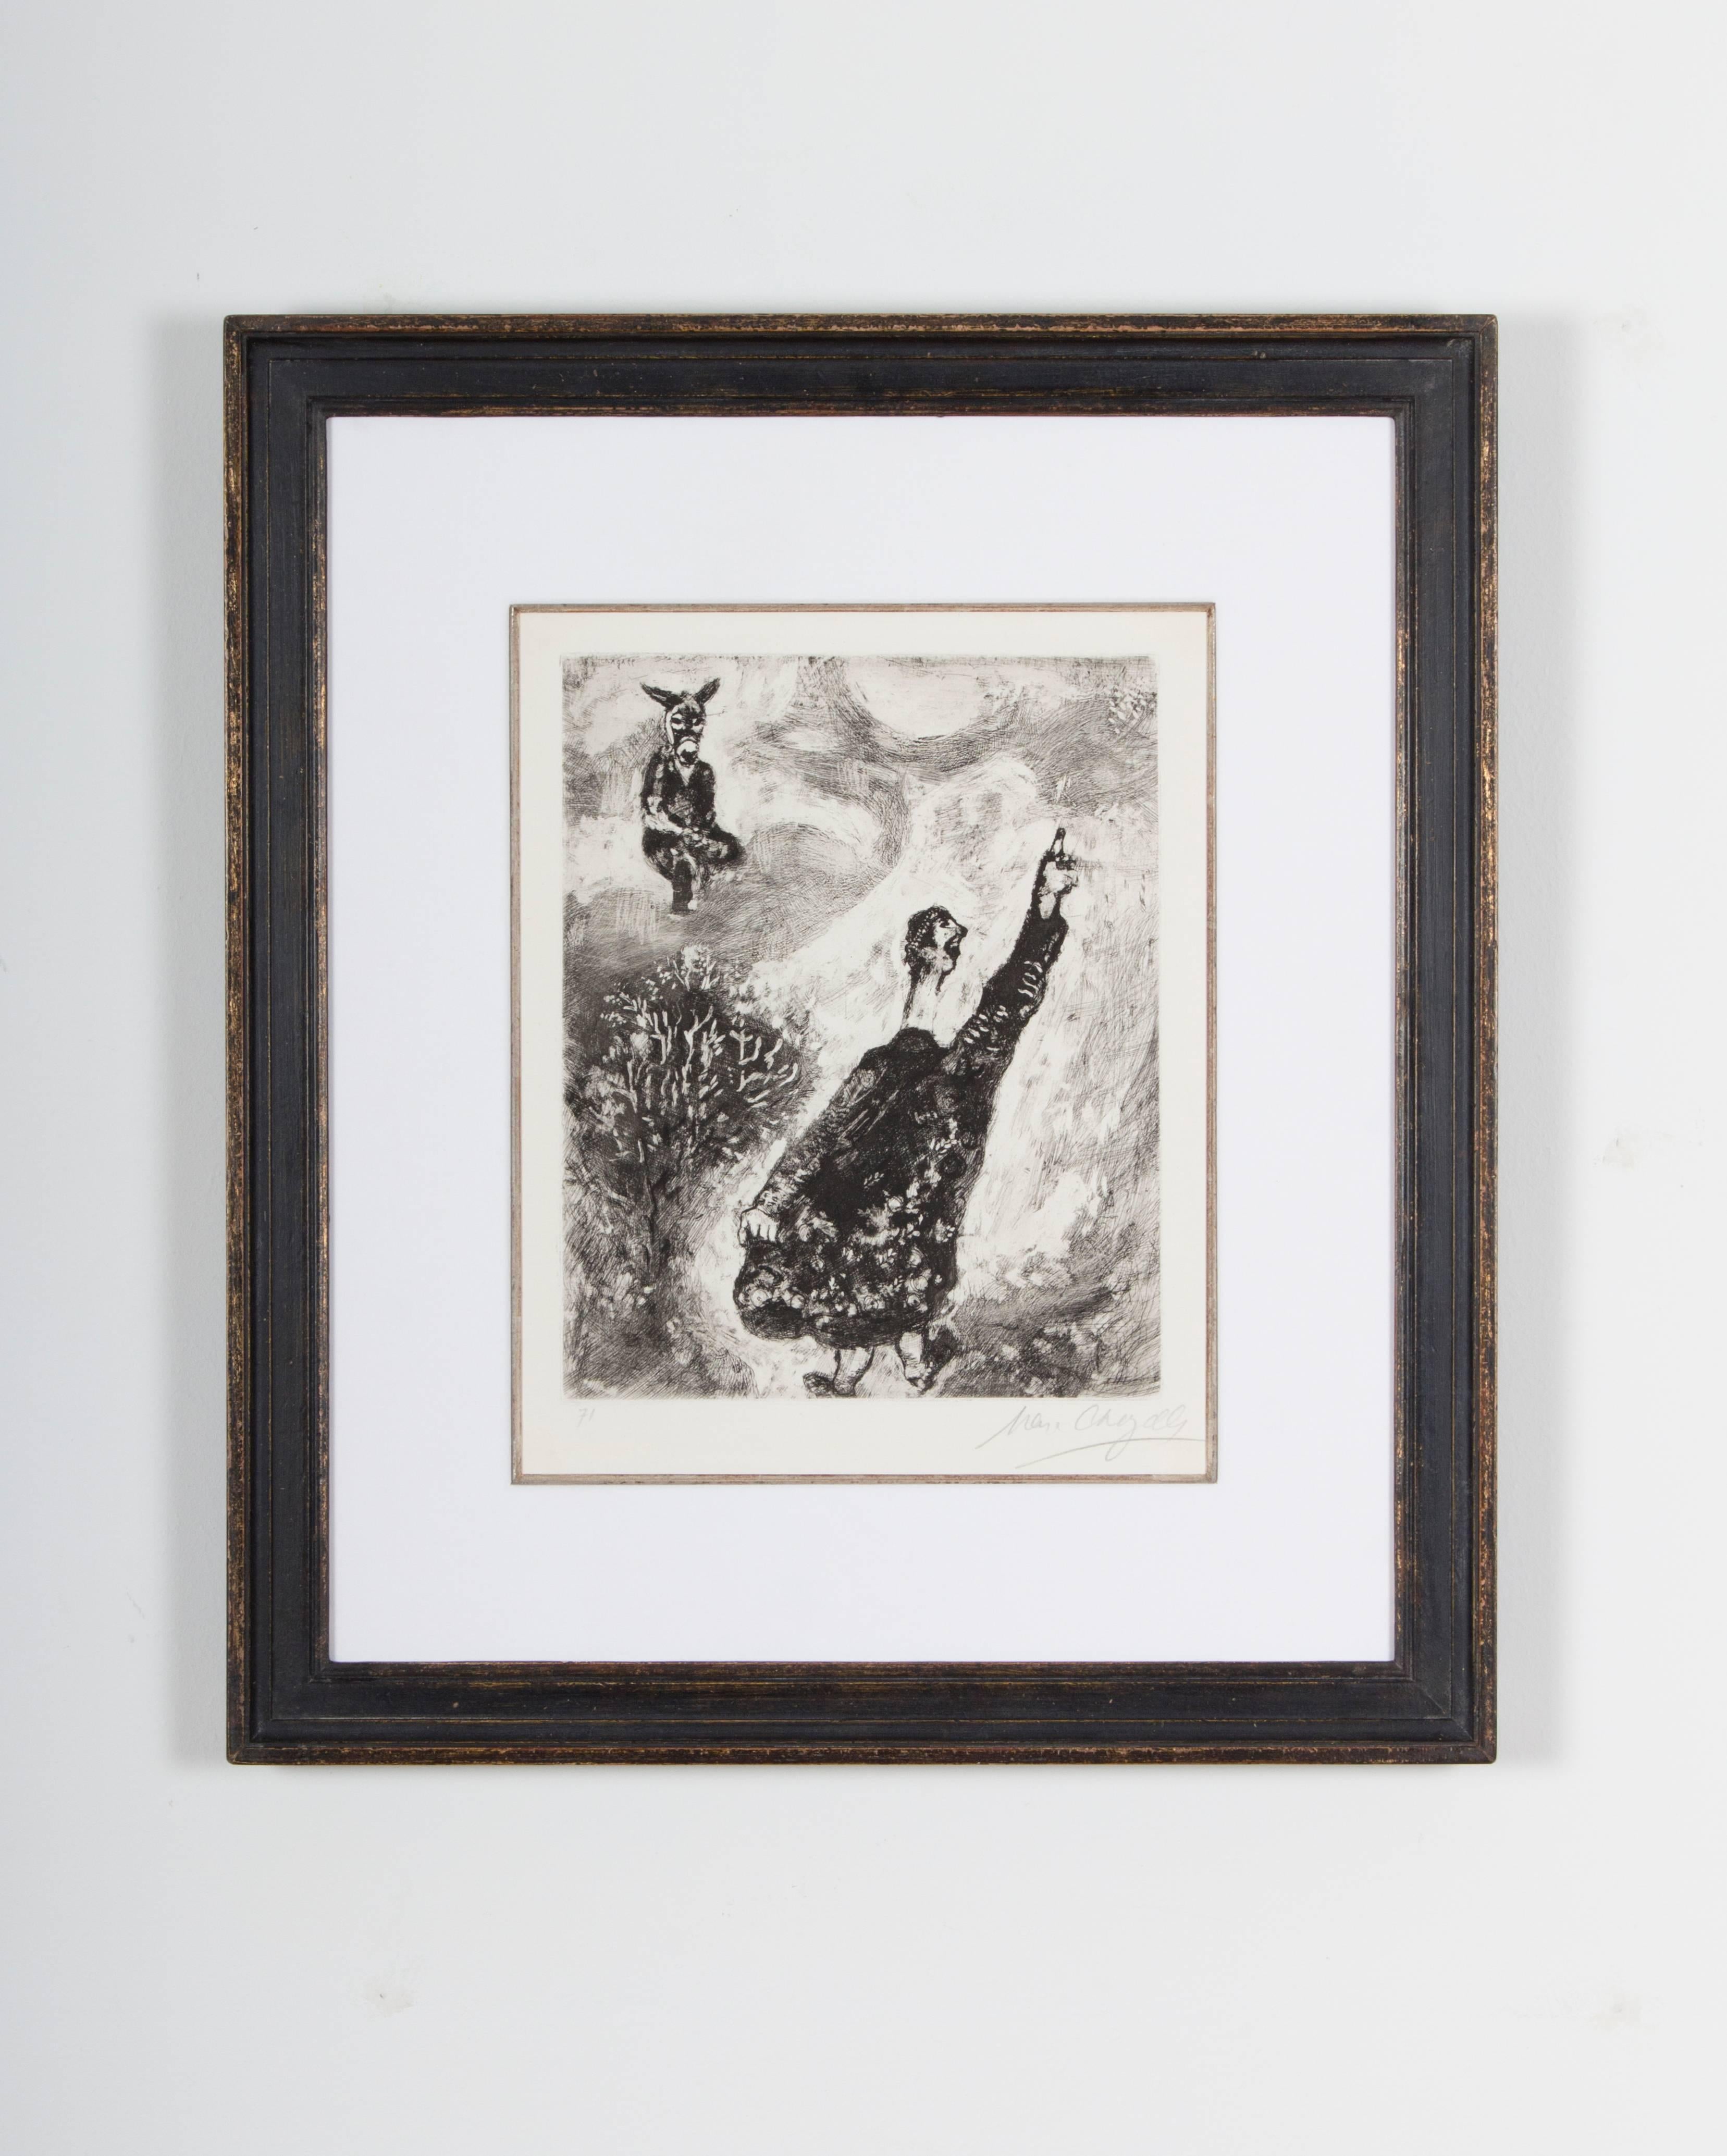 The illustration named 'Le Charlatan' was issued by Marc Chagall for Ambroise Vollard for the book 'Les Fables de la Fontaine'. Printed by Maurice Potin in Paris it is number 71 /100.
Hand signed in pencil 'Marc Chagall' and with the printed